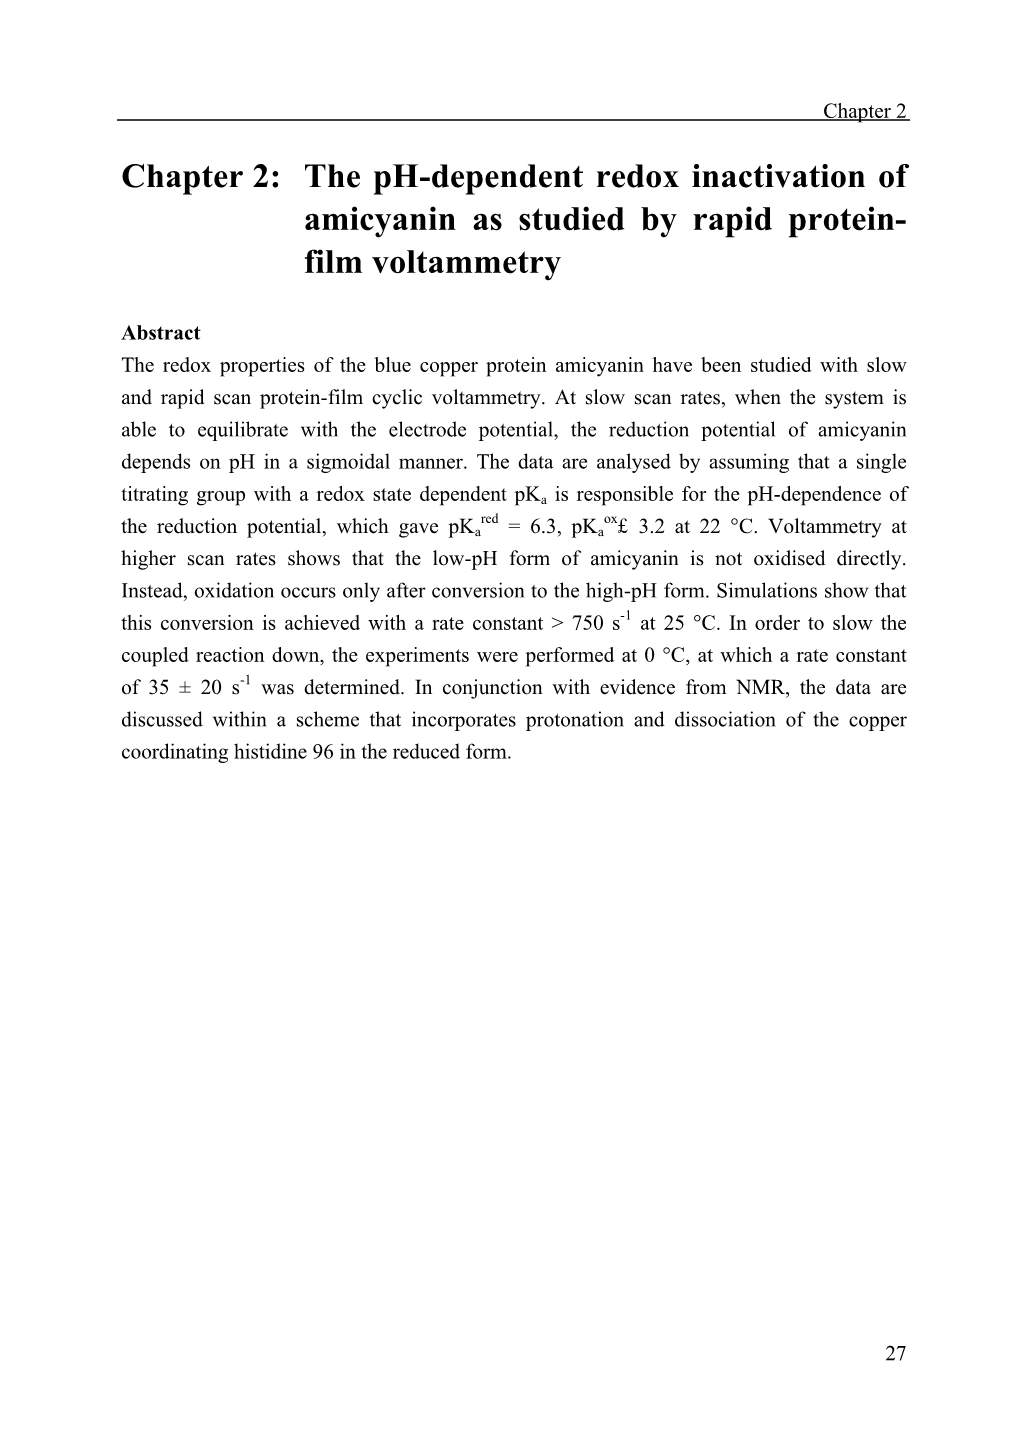 Chapter 2: the Ph-Dependent Redox Inactivation of Amicyanin As Studied by Rapid Protein- Film Voltammetry